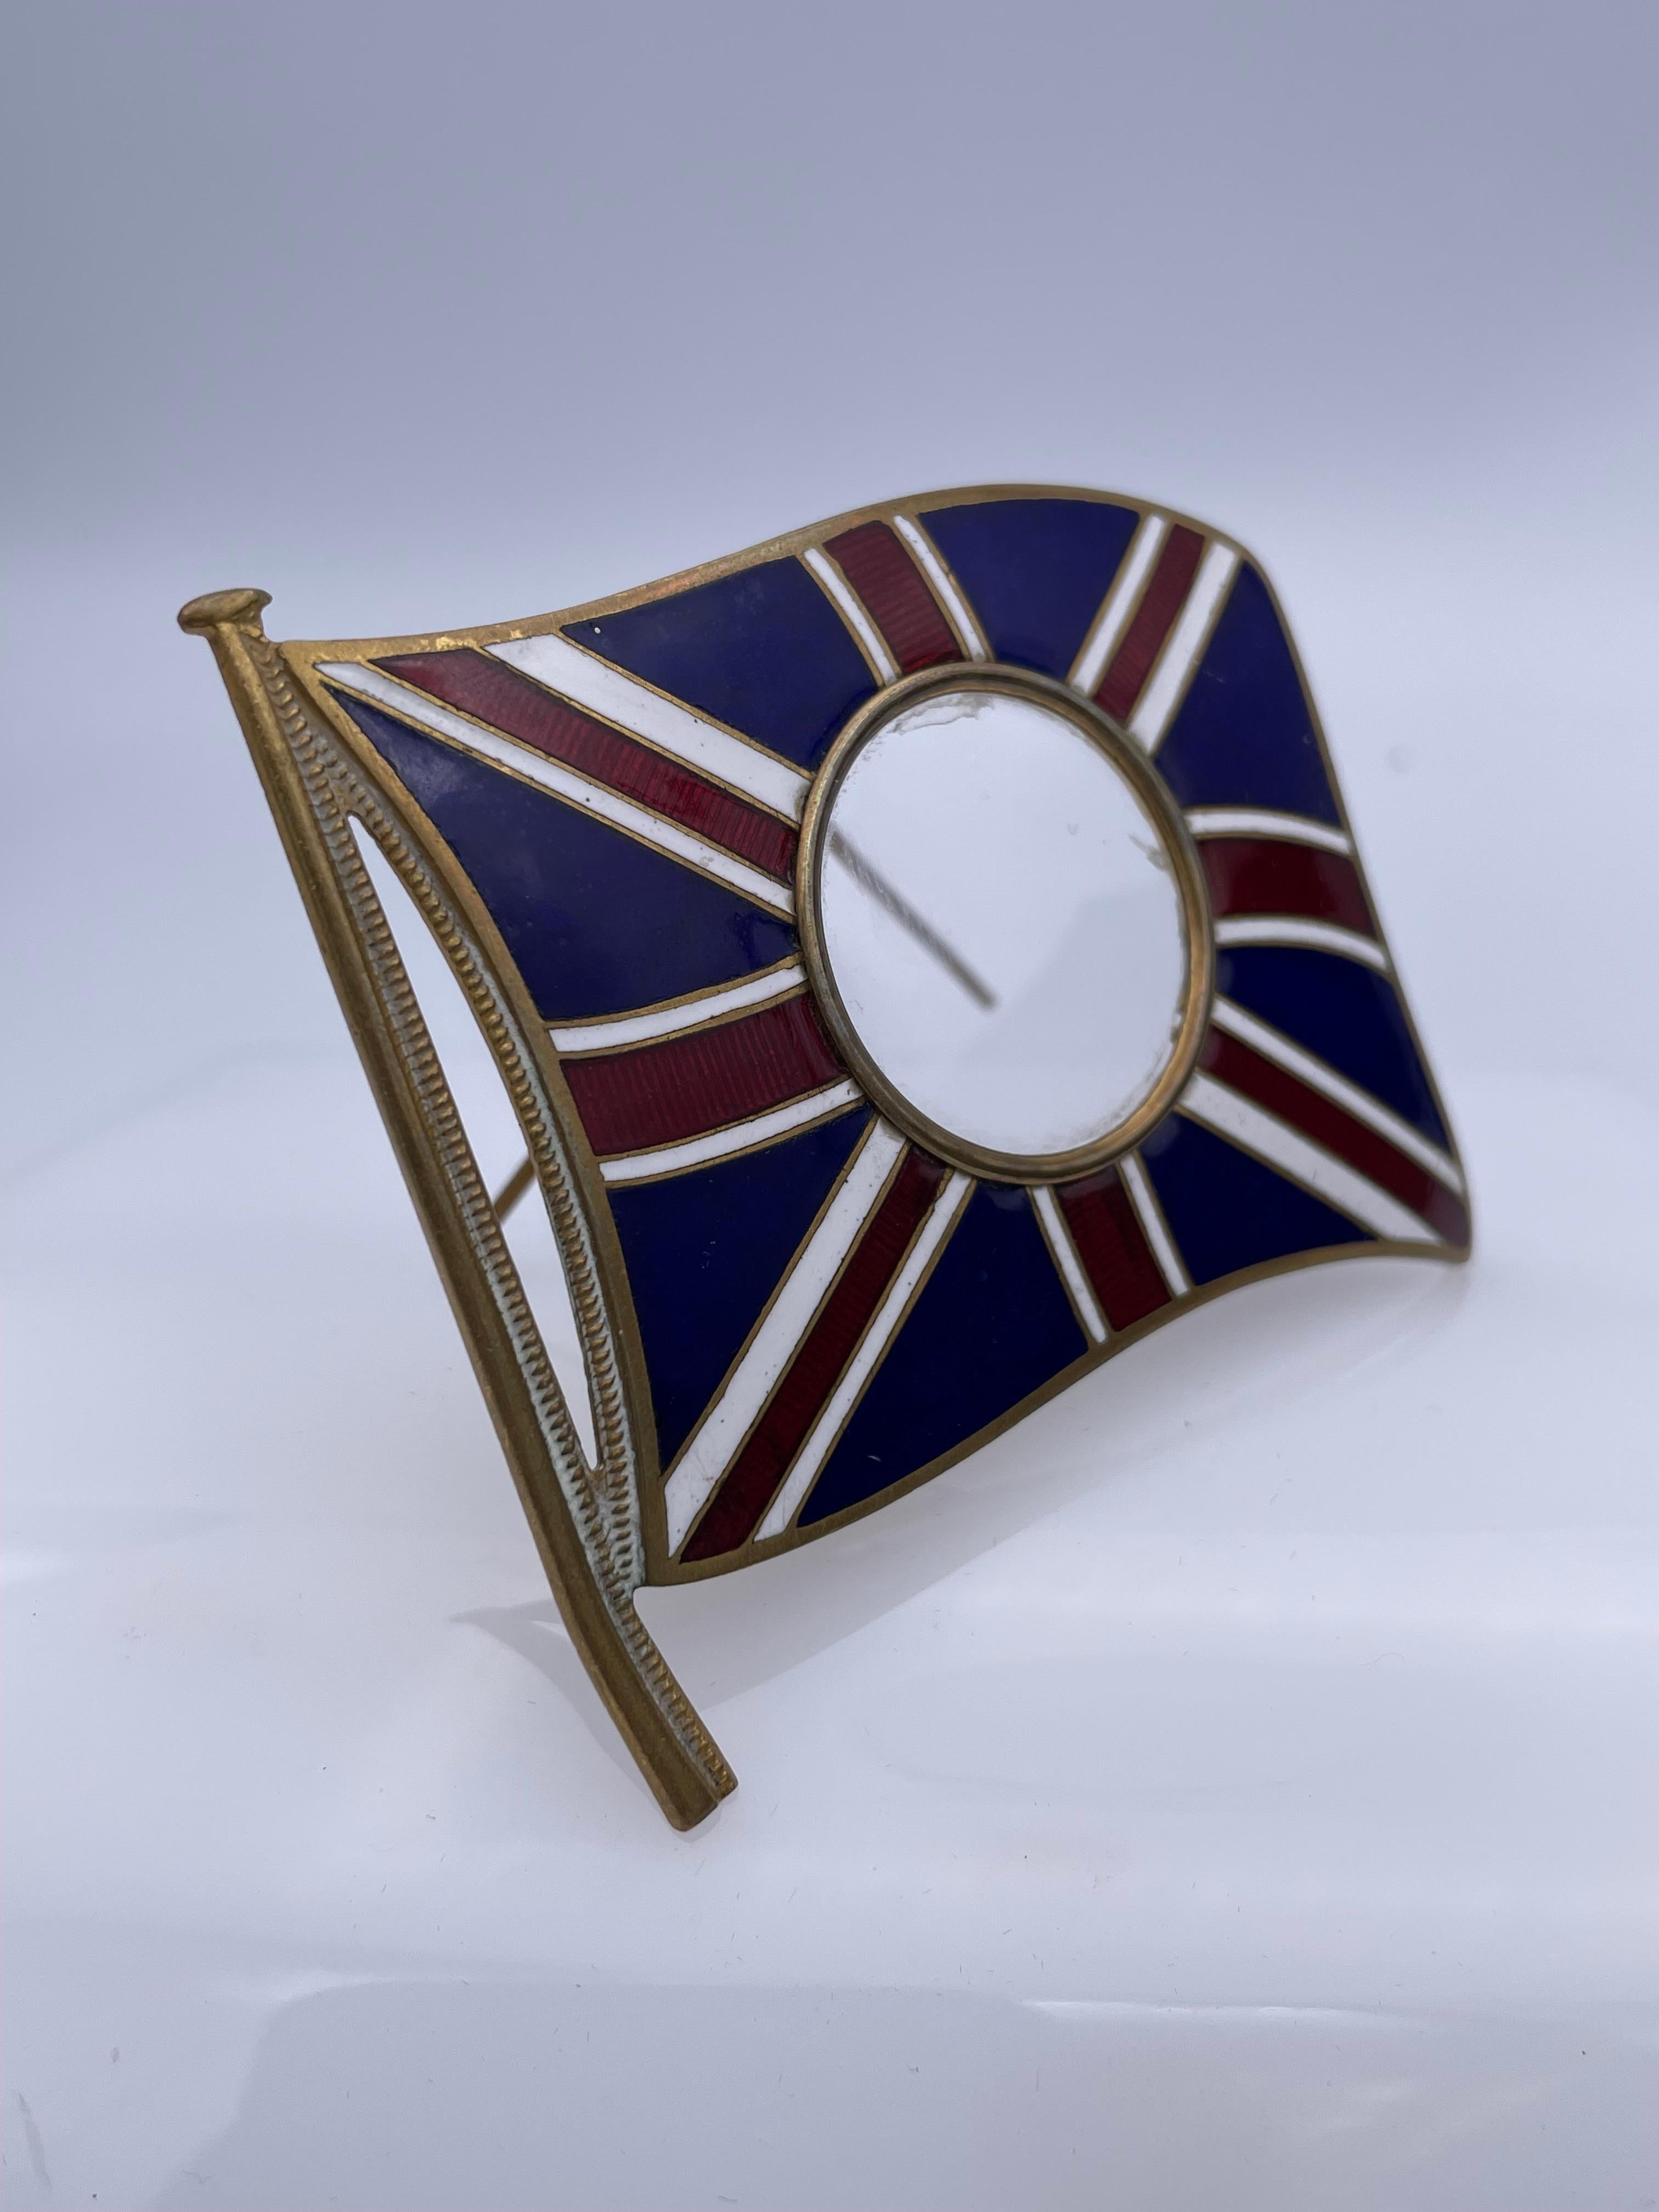 A most charming picture frame: a figural depiction of the British Union Jack, with an opening for a photograph in the center. Bright cobalt blue, red and white enamel. A very graceful configuration. 2 3/4